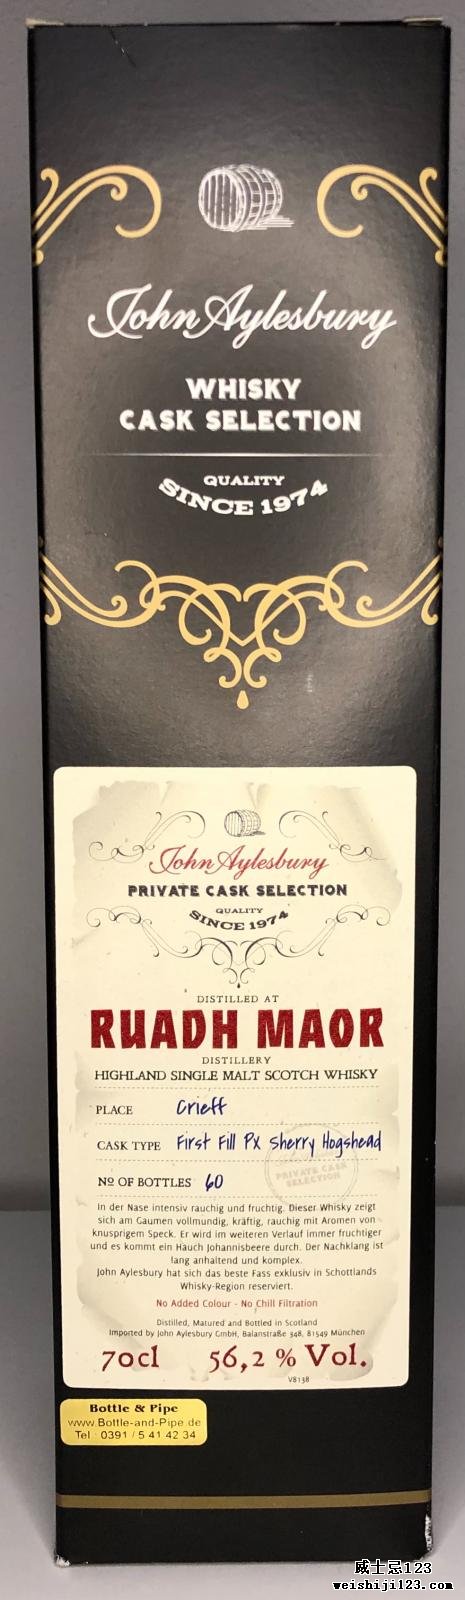 Ruadh Maor Private Cask Selection JAy